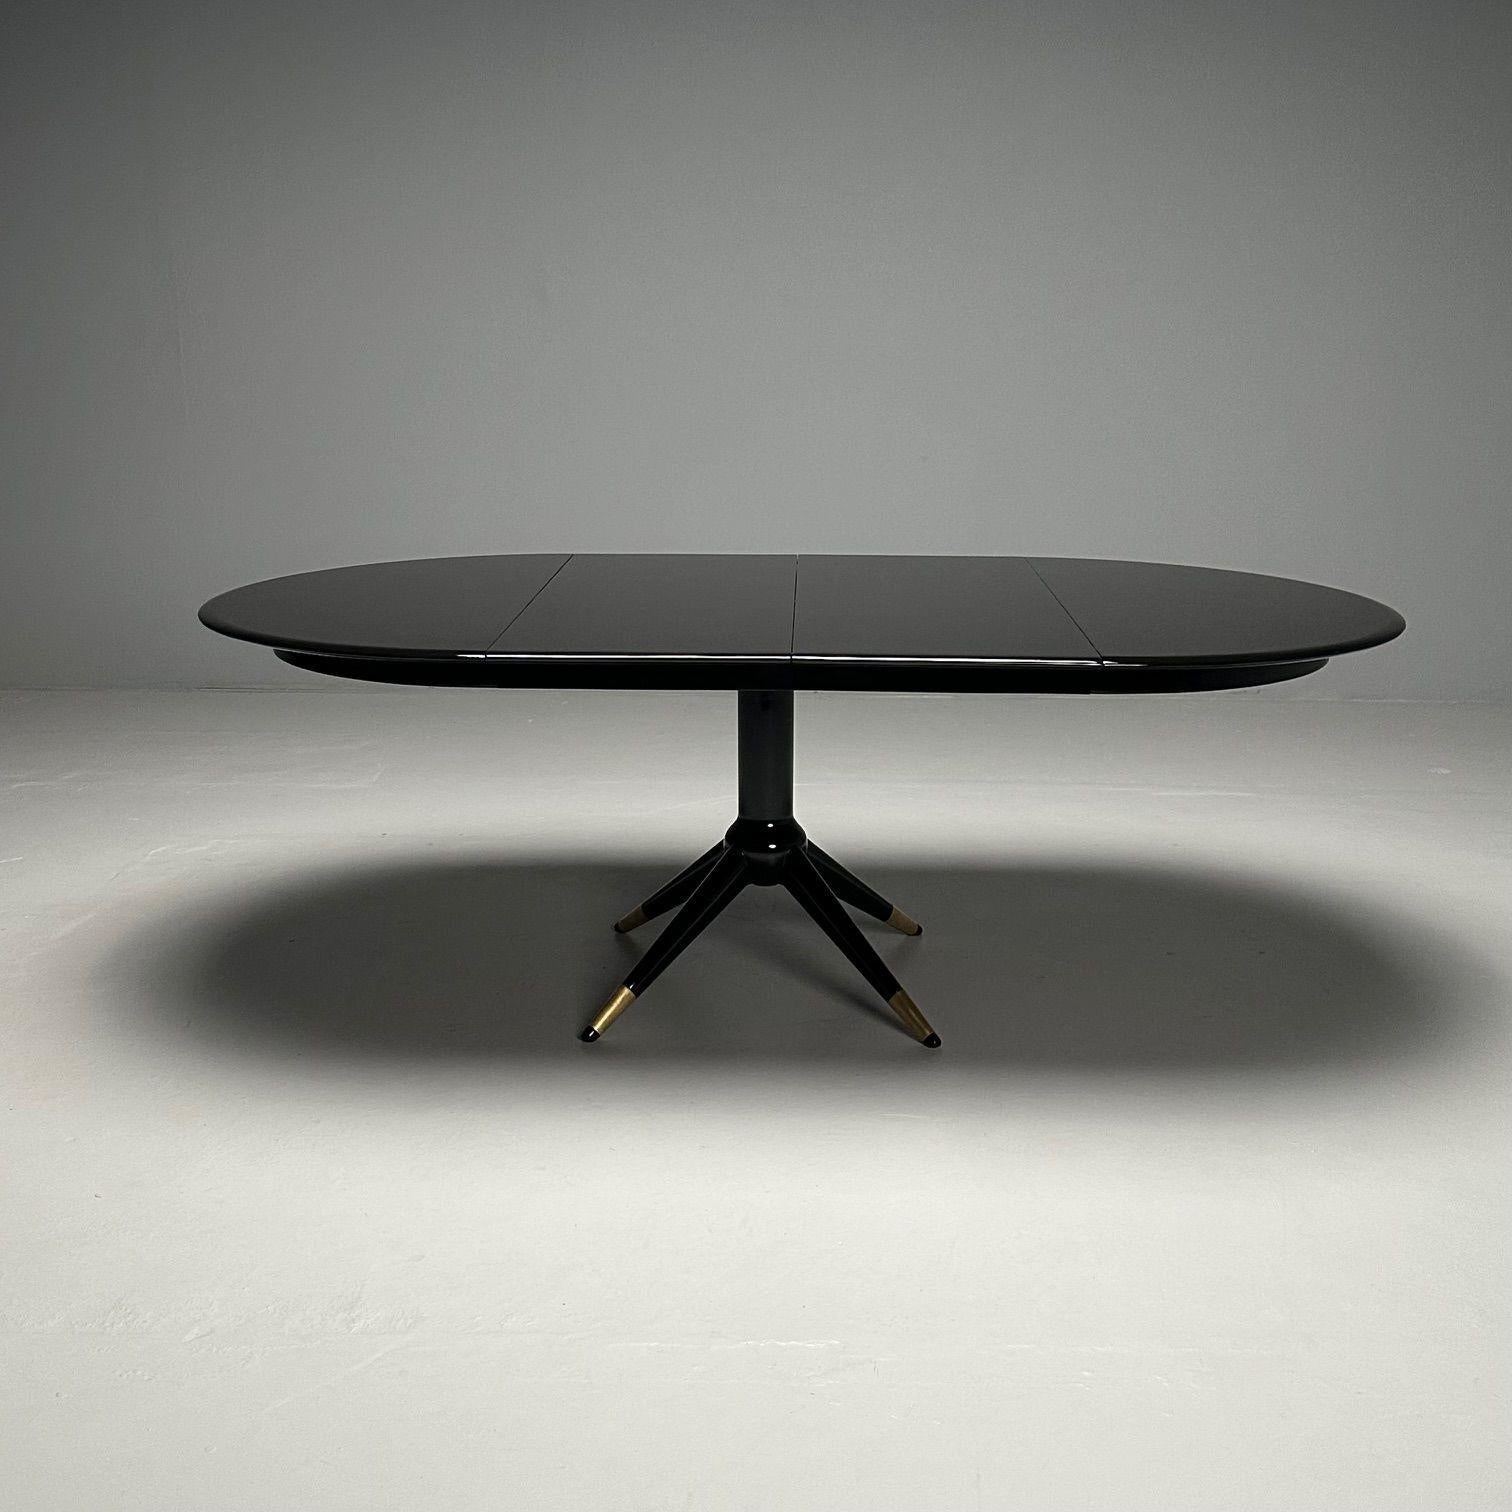 Melchiorre Bega, Italian Mid-Century Modern, Dining or Center Table, Table, Black Lacquer

Dining table with two leaves designed by Melchiorre Bega (1898-1976) for the Hotel Bristol in Merano, Italy, circa 1950s. A matching set of eight dining room